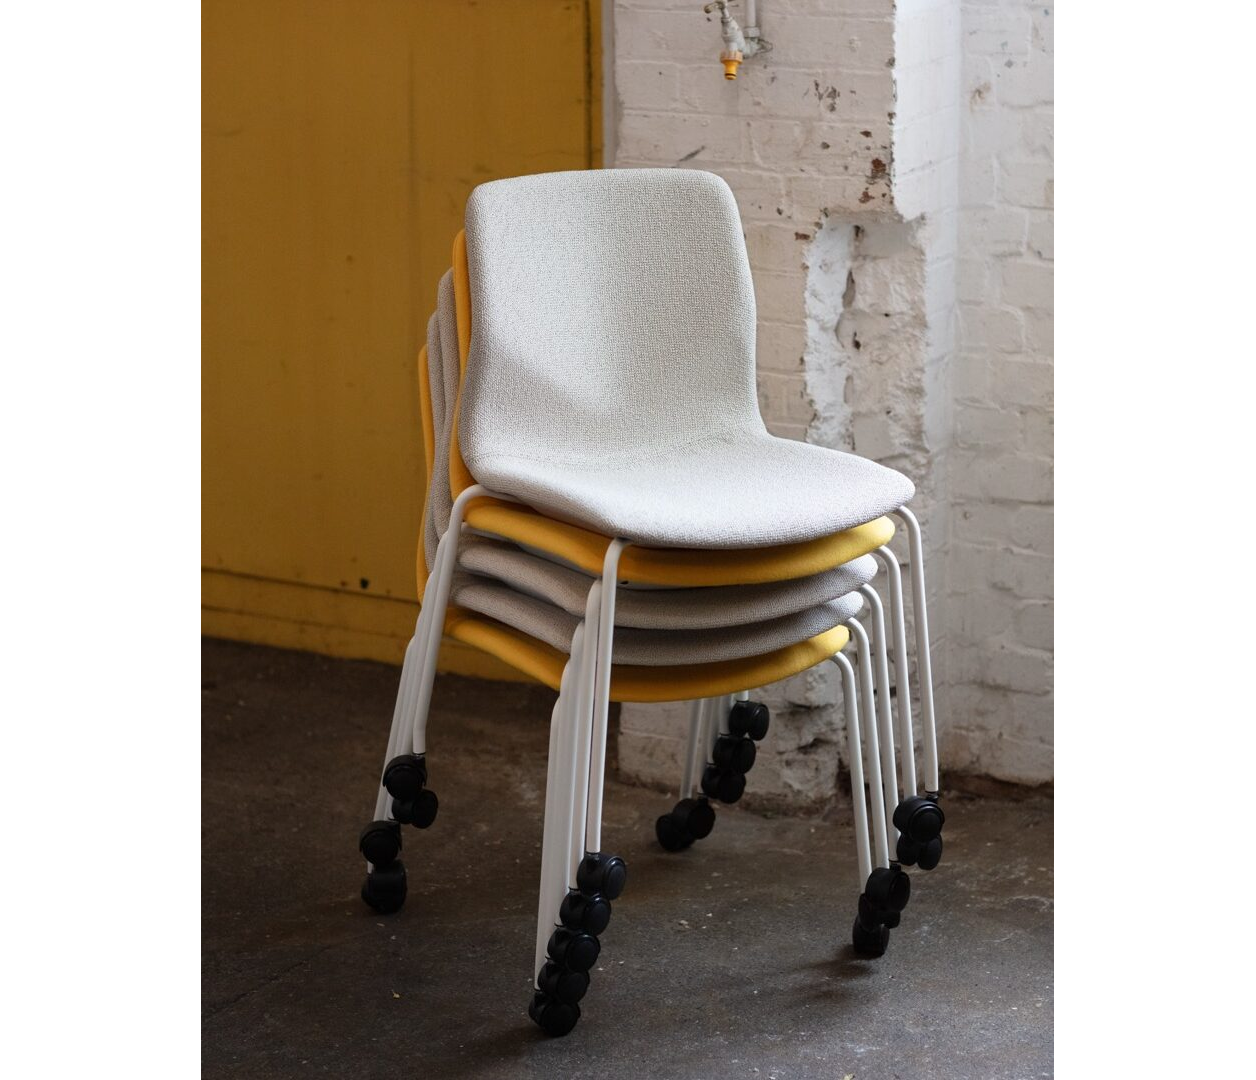 OCEE&FOUR – Chairs – FourSure 77 – Lifestyle Image 11(1) Large